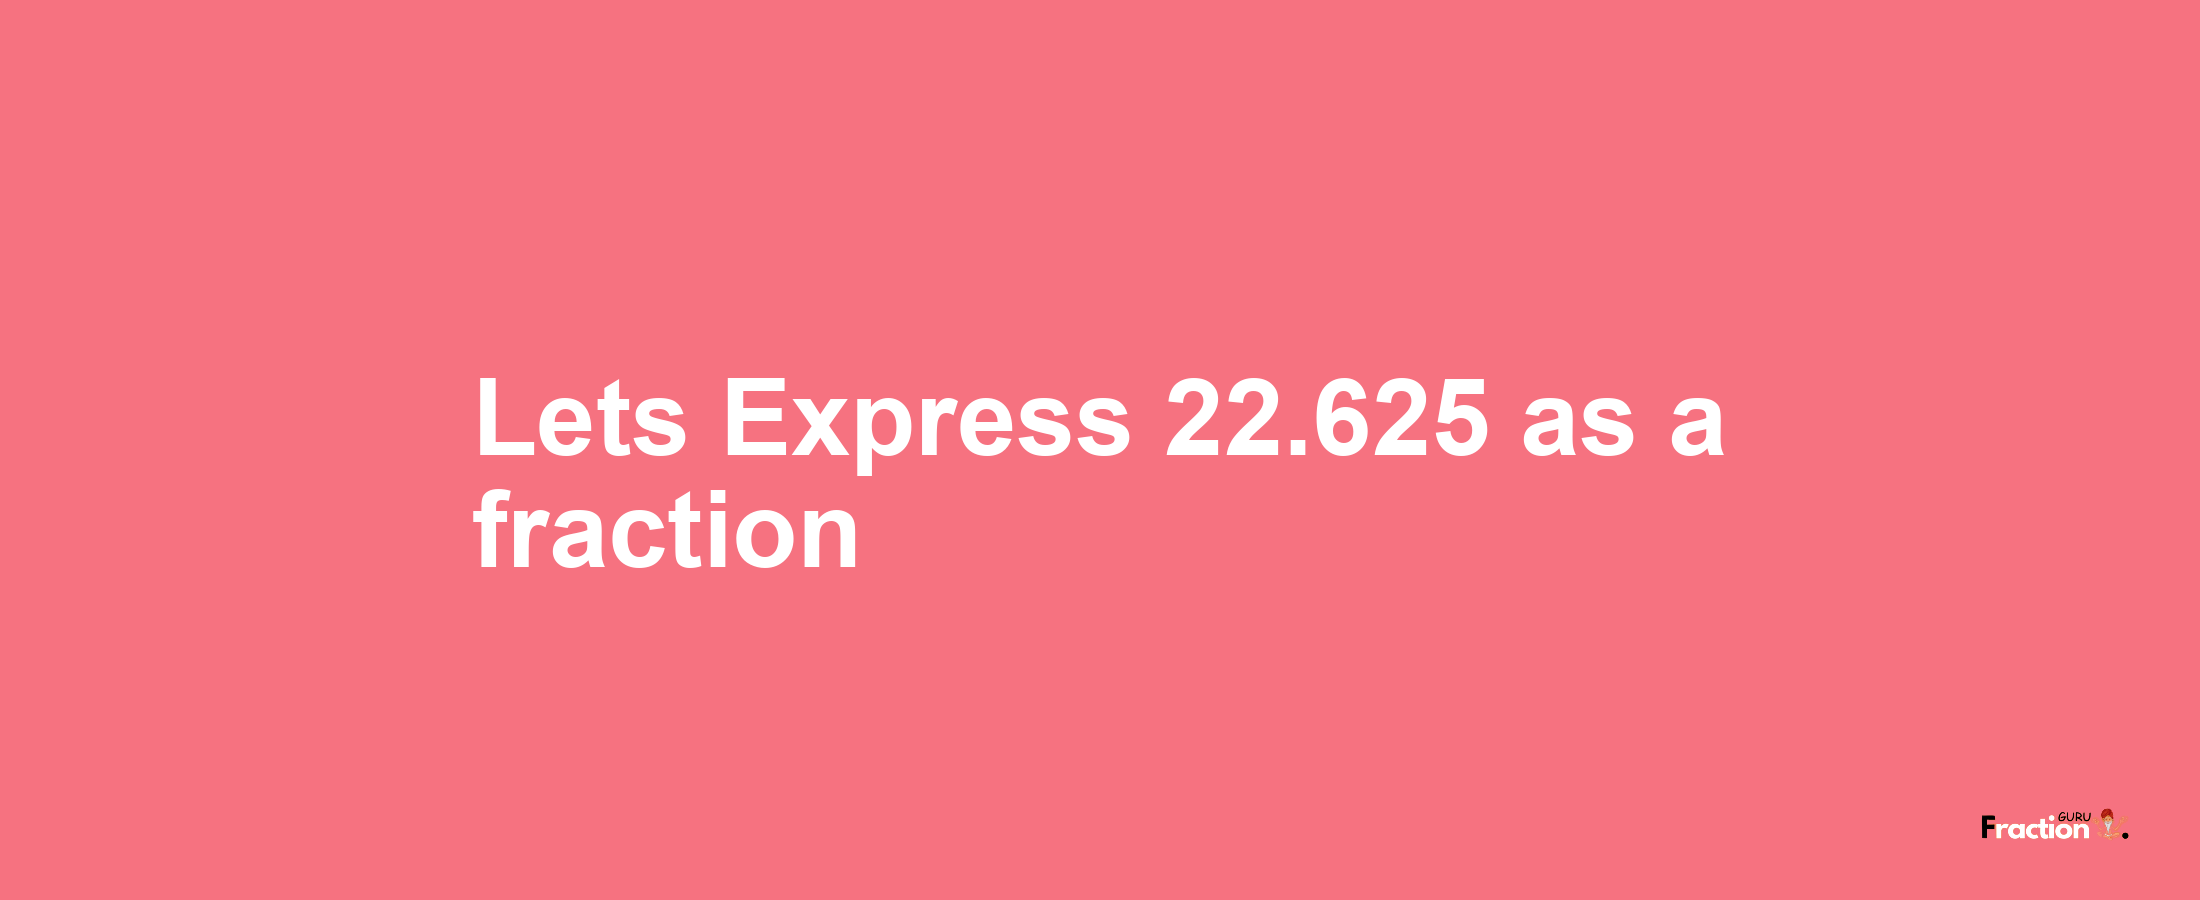 Lets Express 22.625 as afraction